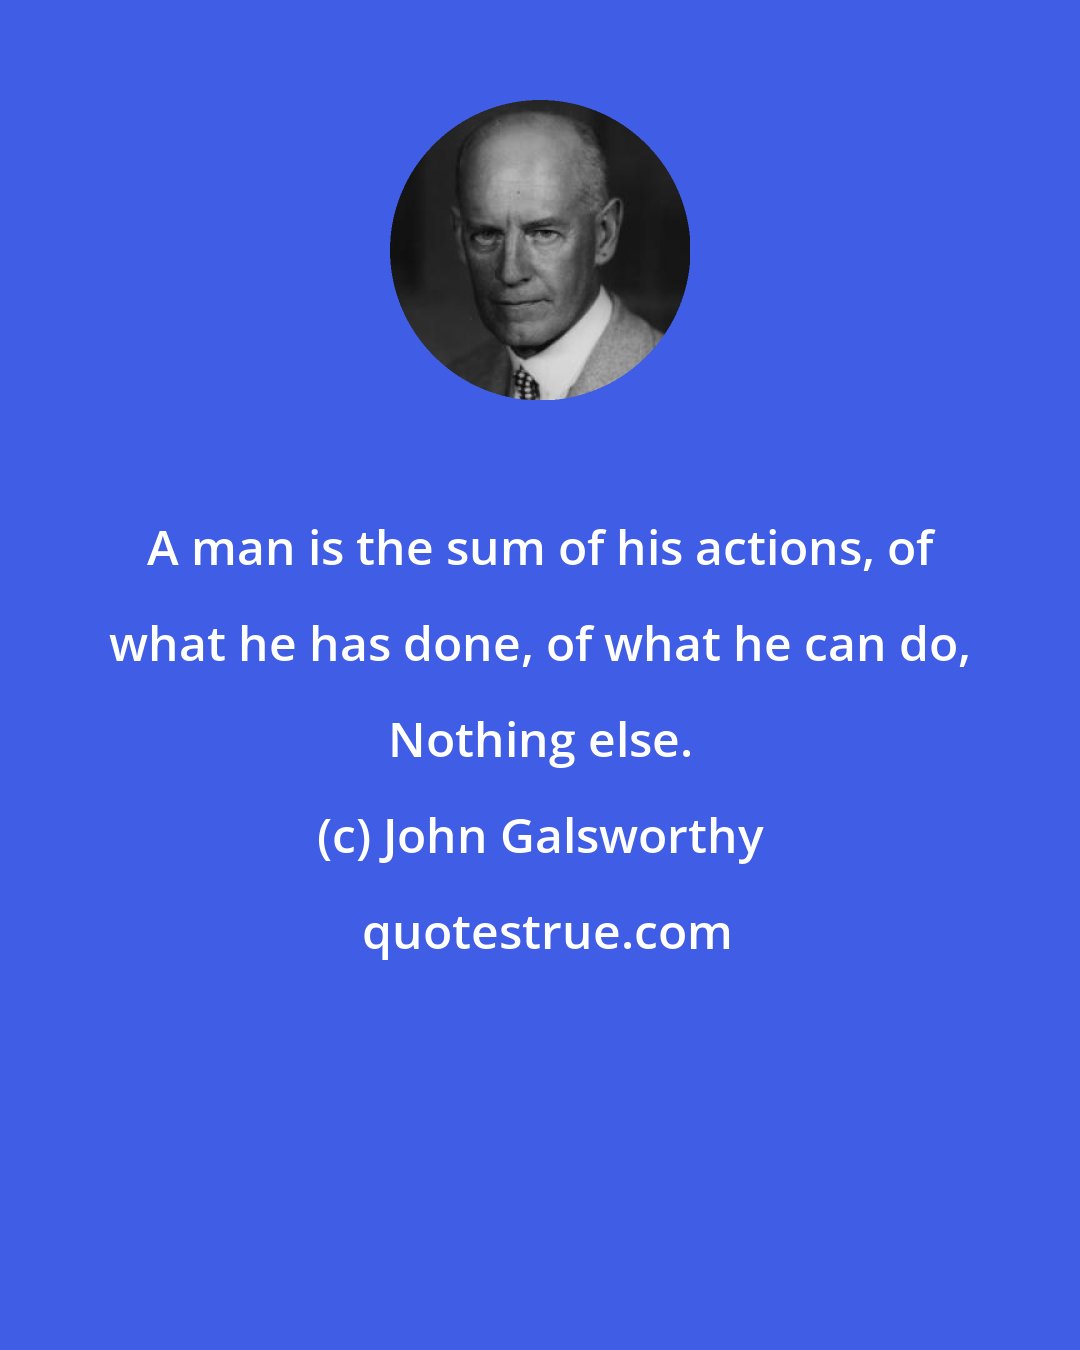 John Galsworthy: A man is the sum of his actions, of what he has done, of what he can do, Nothing else.